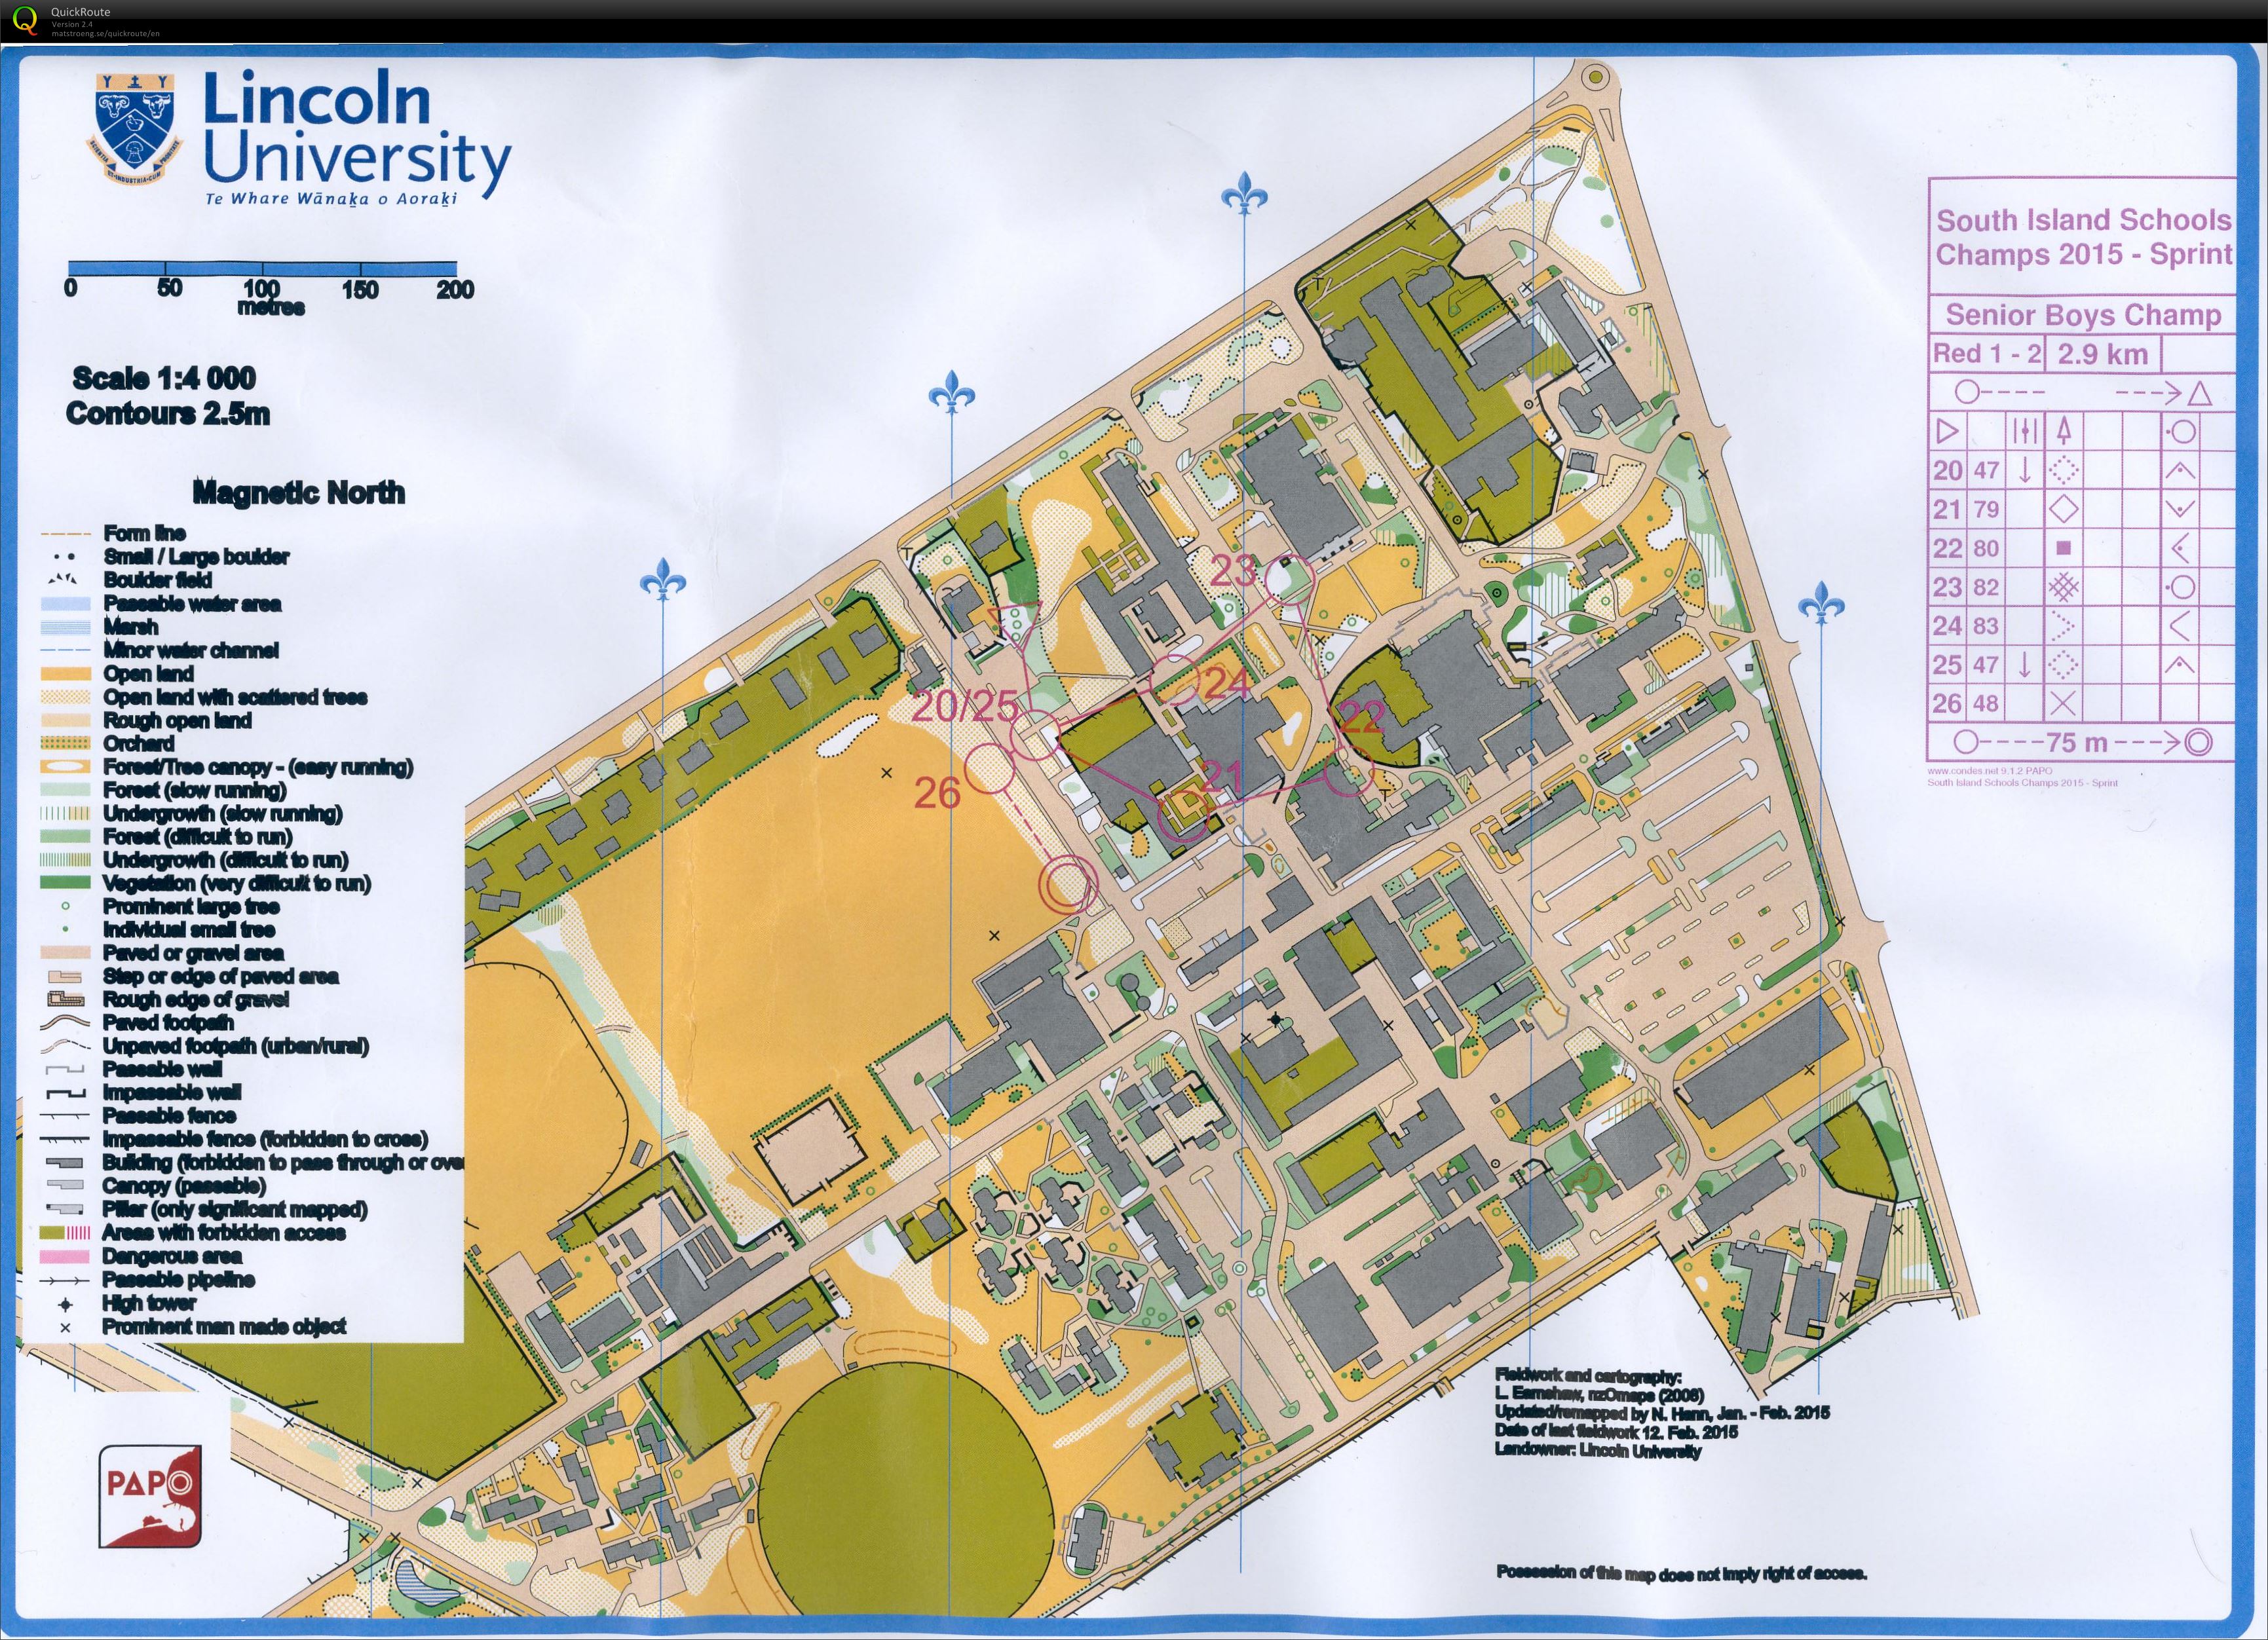 SISS Sprint Champs - Map 2 (19/04/2015)